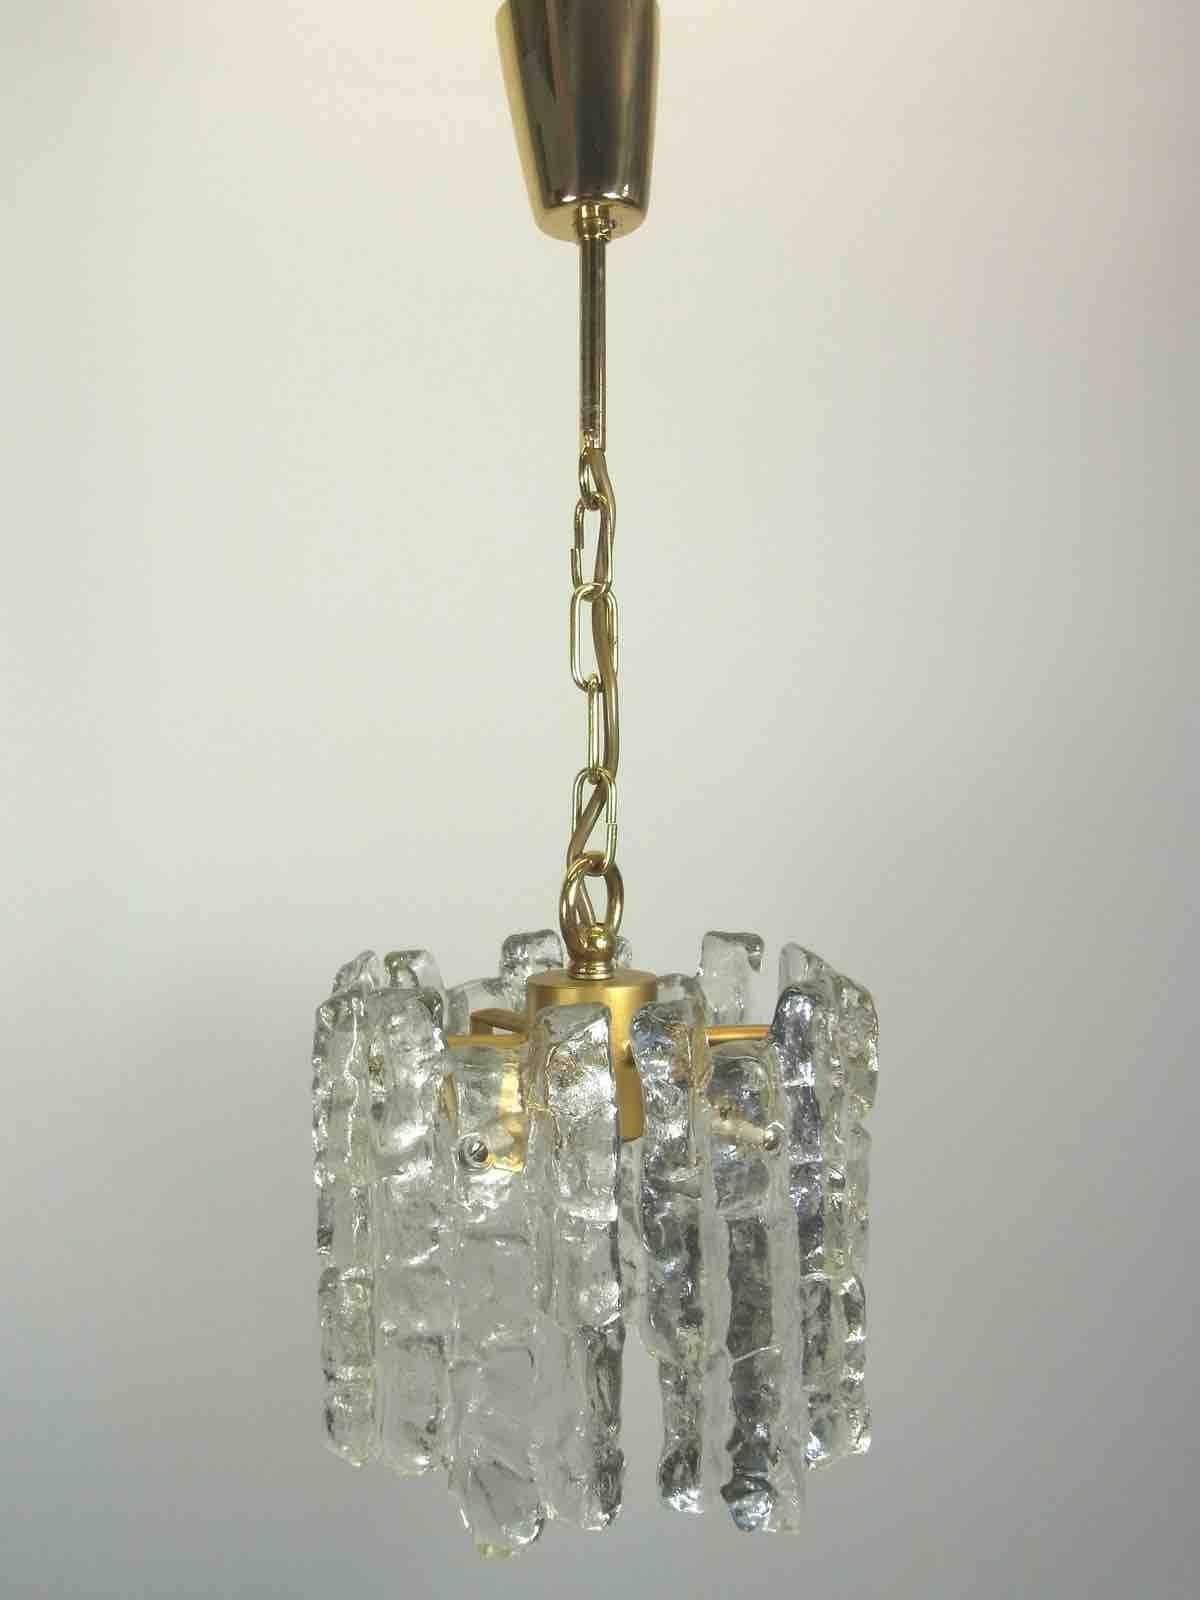 Beautiful pendant light, manufactured by Kalmar Austria in the 1960s. Brass hardware with one light source and six ice glass panels on it. In very good condition. The Fixture requires one European E27 Edison bulb, up to 100 watt.